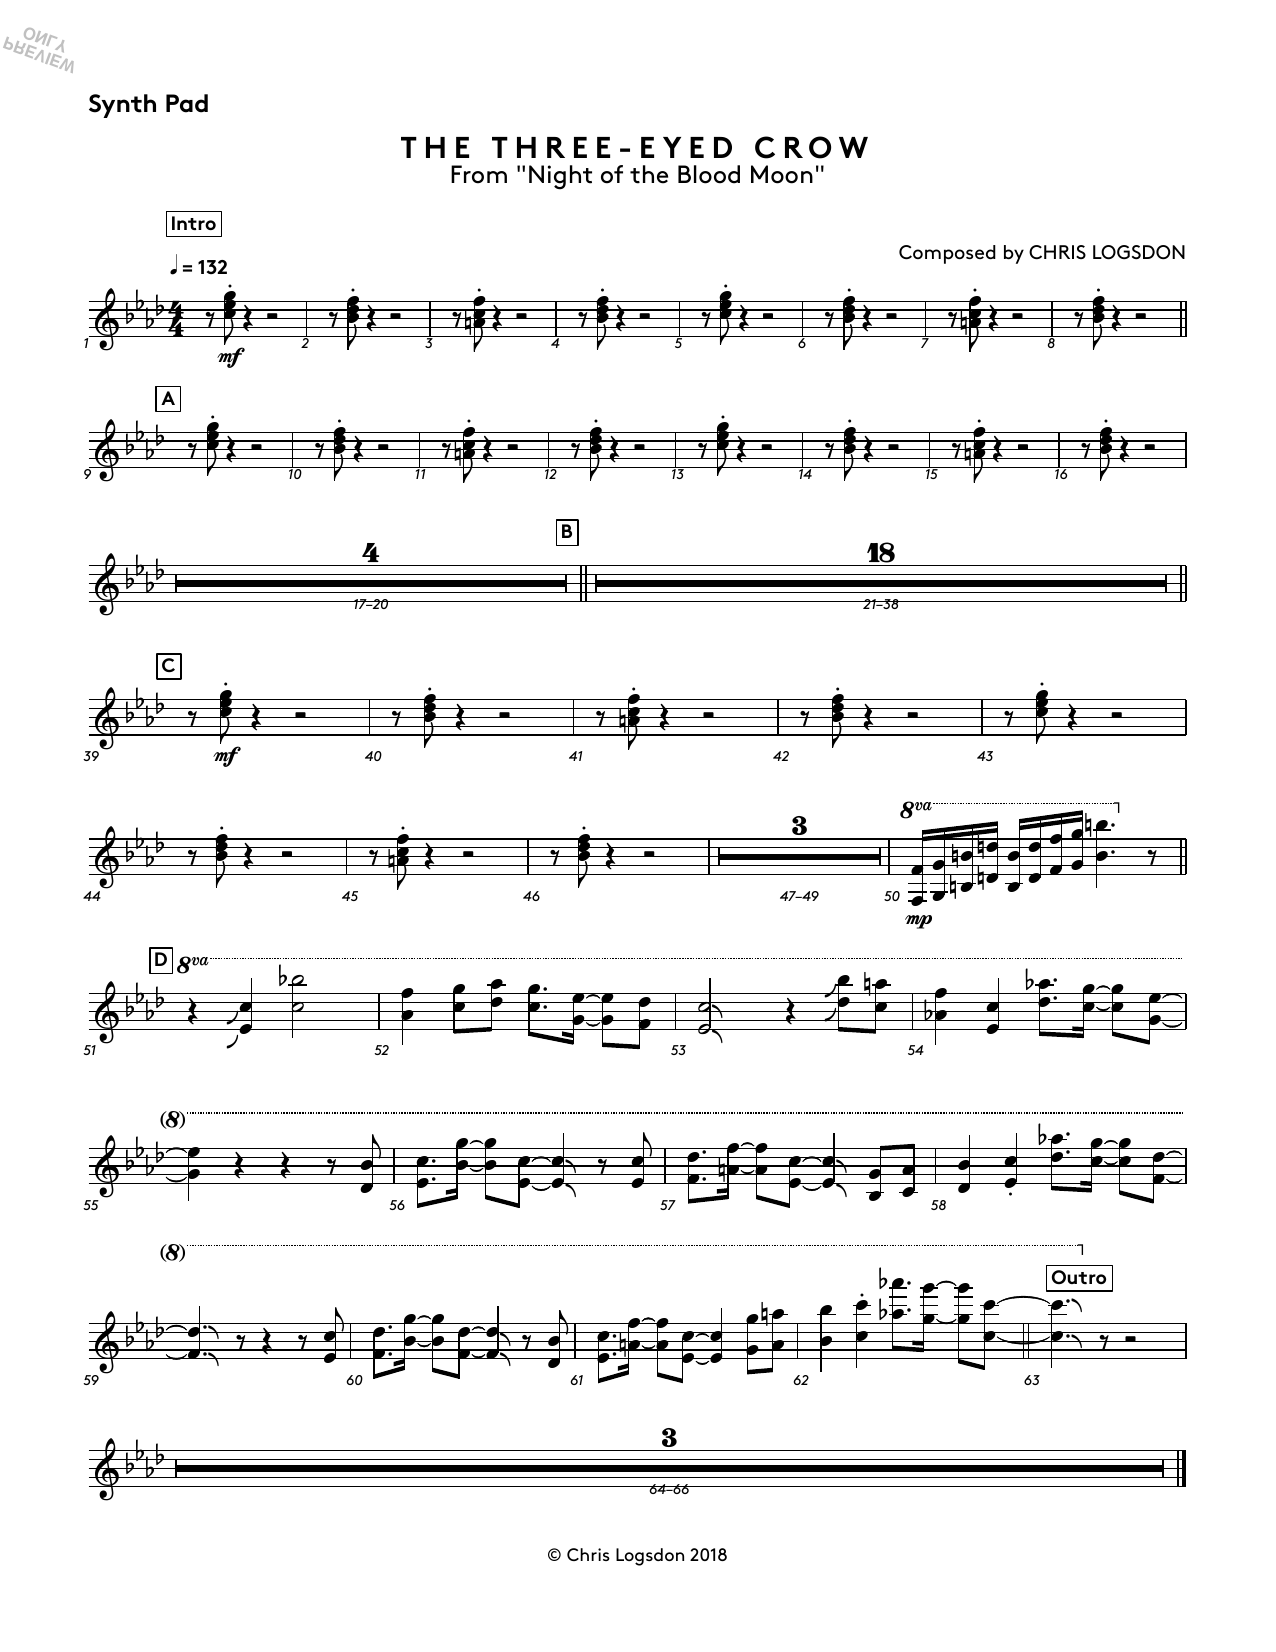 Chris Logsdon The Three-Eyed Crow (from Night of the Blood Moon) - Synth Pad sheet music preview music notes and score for Performance Ensemble including 1 page(s)